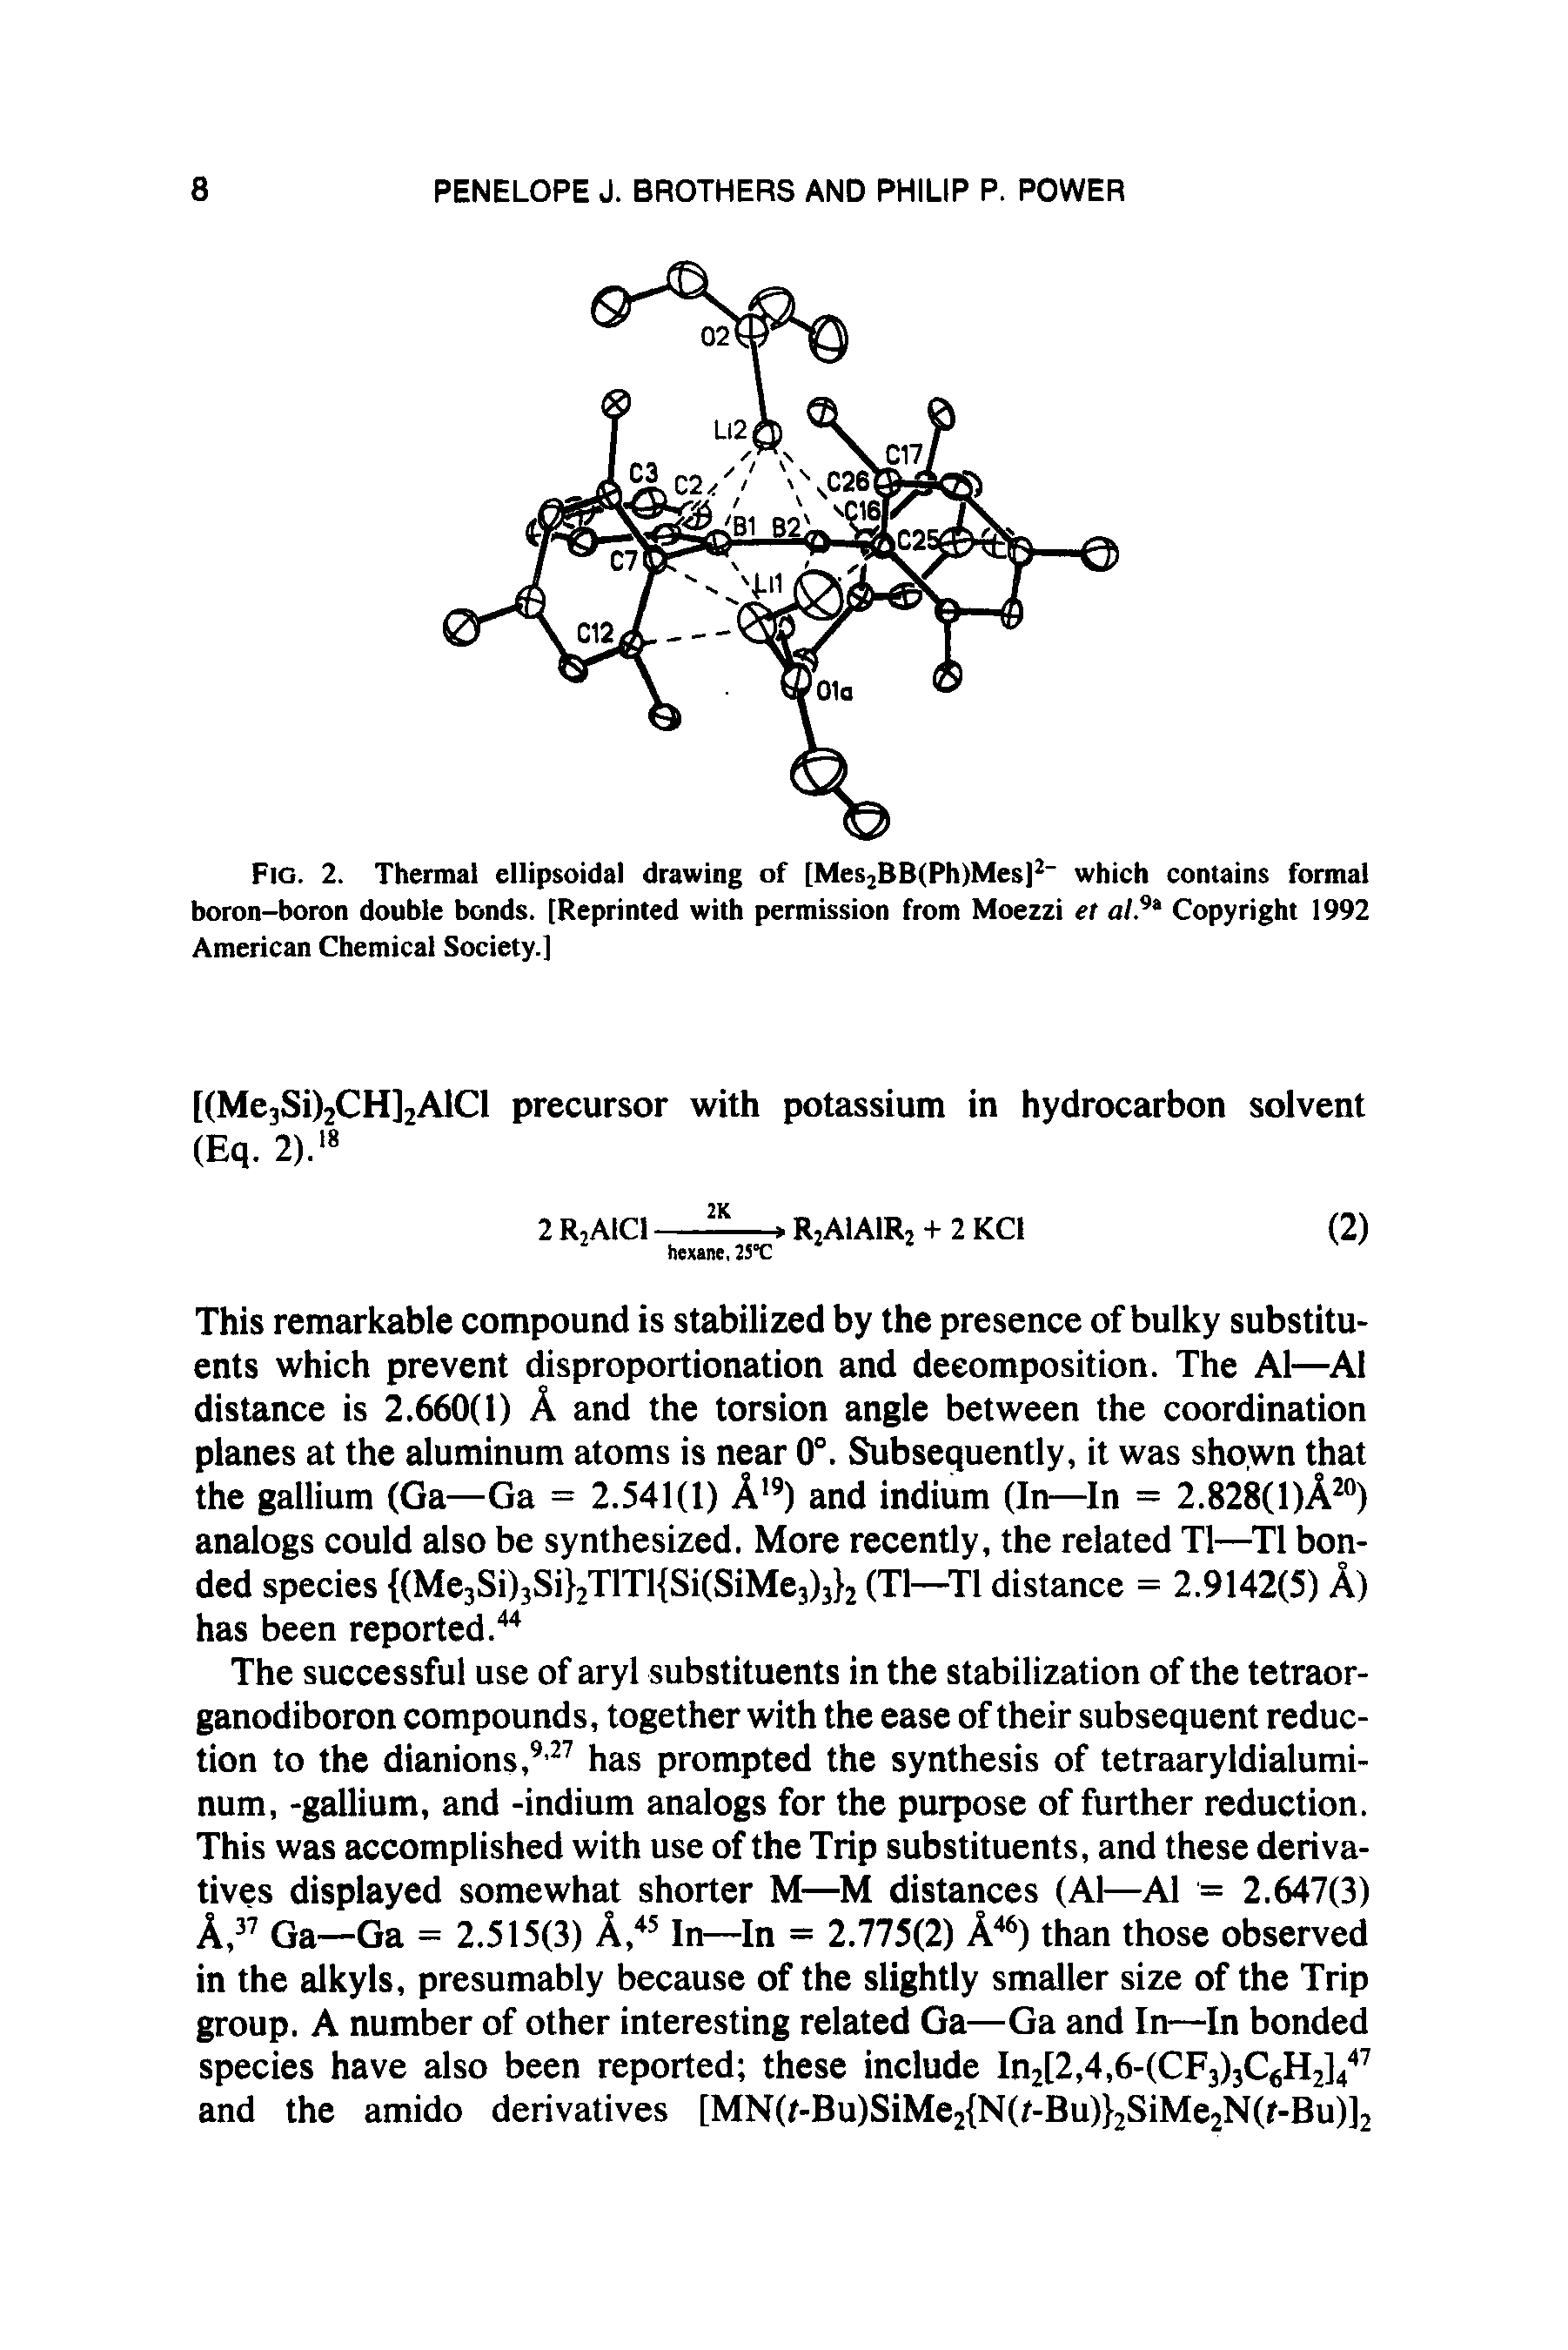 Fig. 2. Thermal ellipsoidal drawing of [Mes2BB(Ph)Mes)2 which contains formal boron-boron double bonds. [Reprinted with permission from Moezzi et al.9 Copyright 1992 American Chemical Society.]...